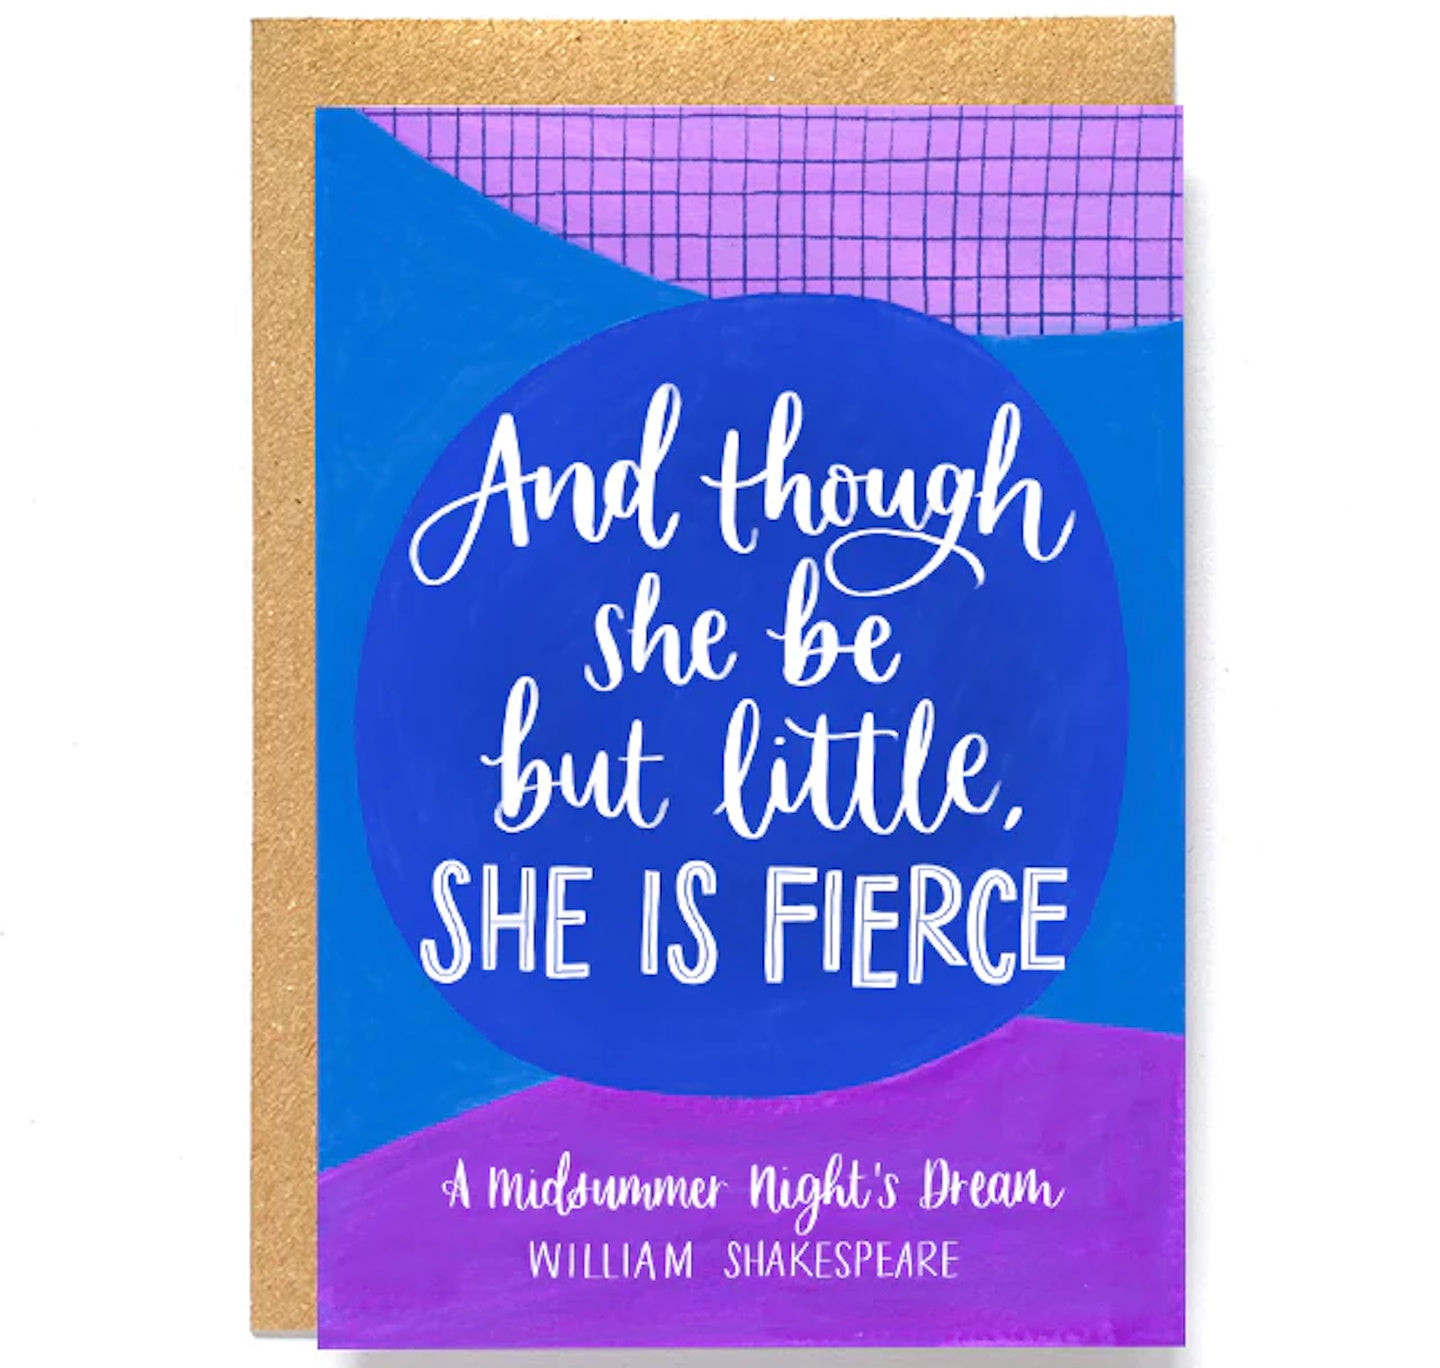 Greeting Card: "And though she be but little, she is fierce"